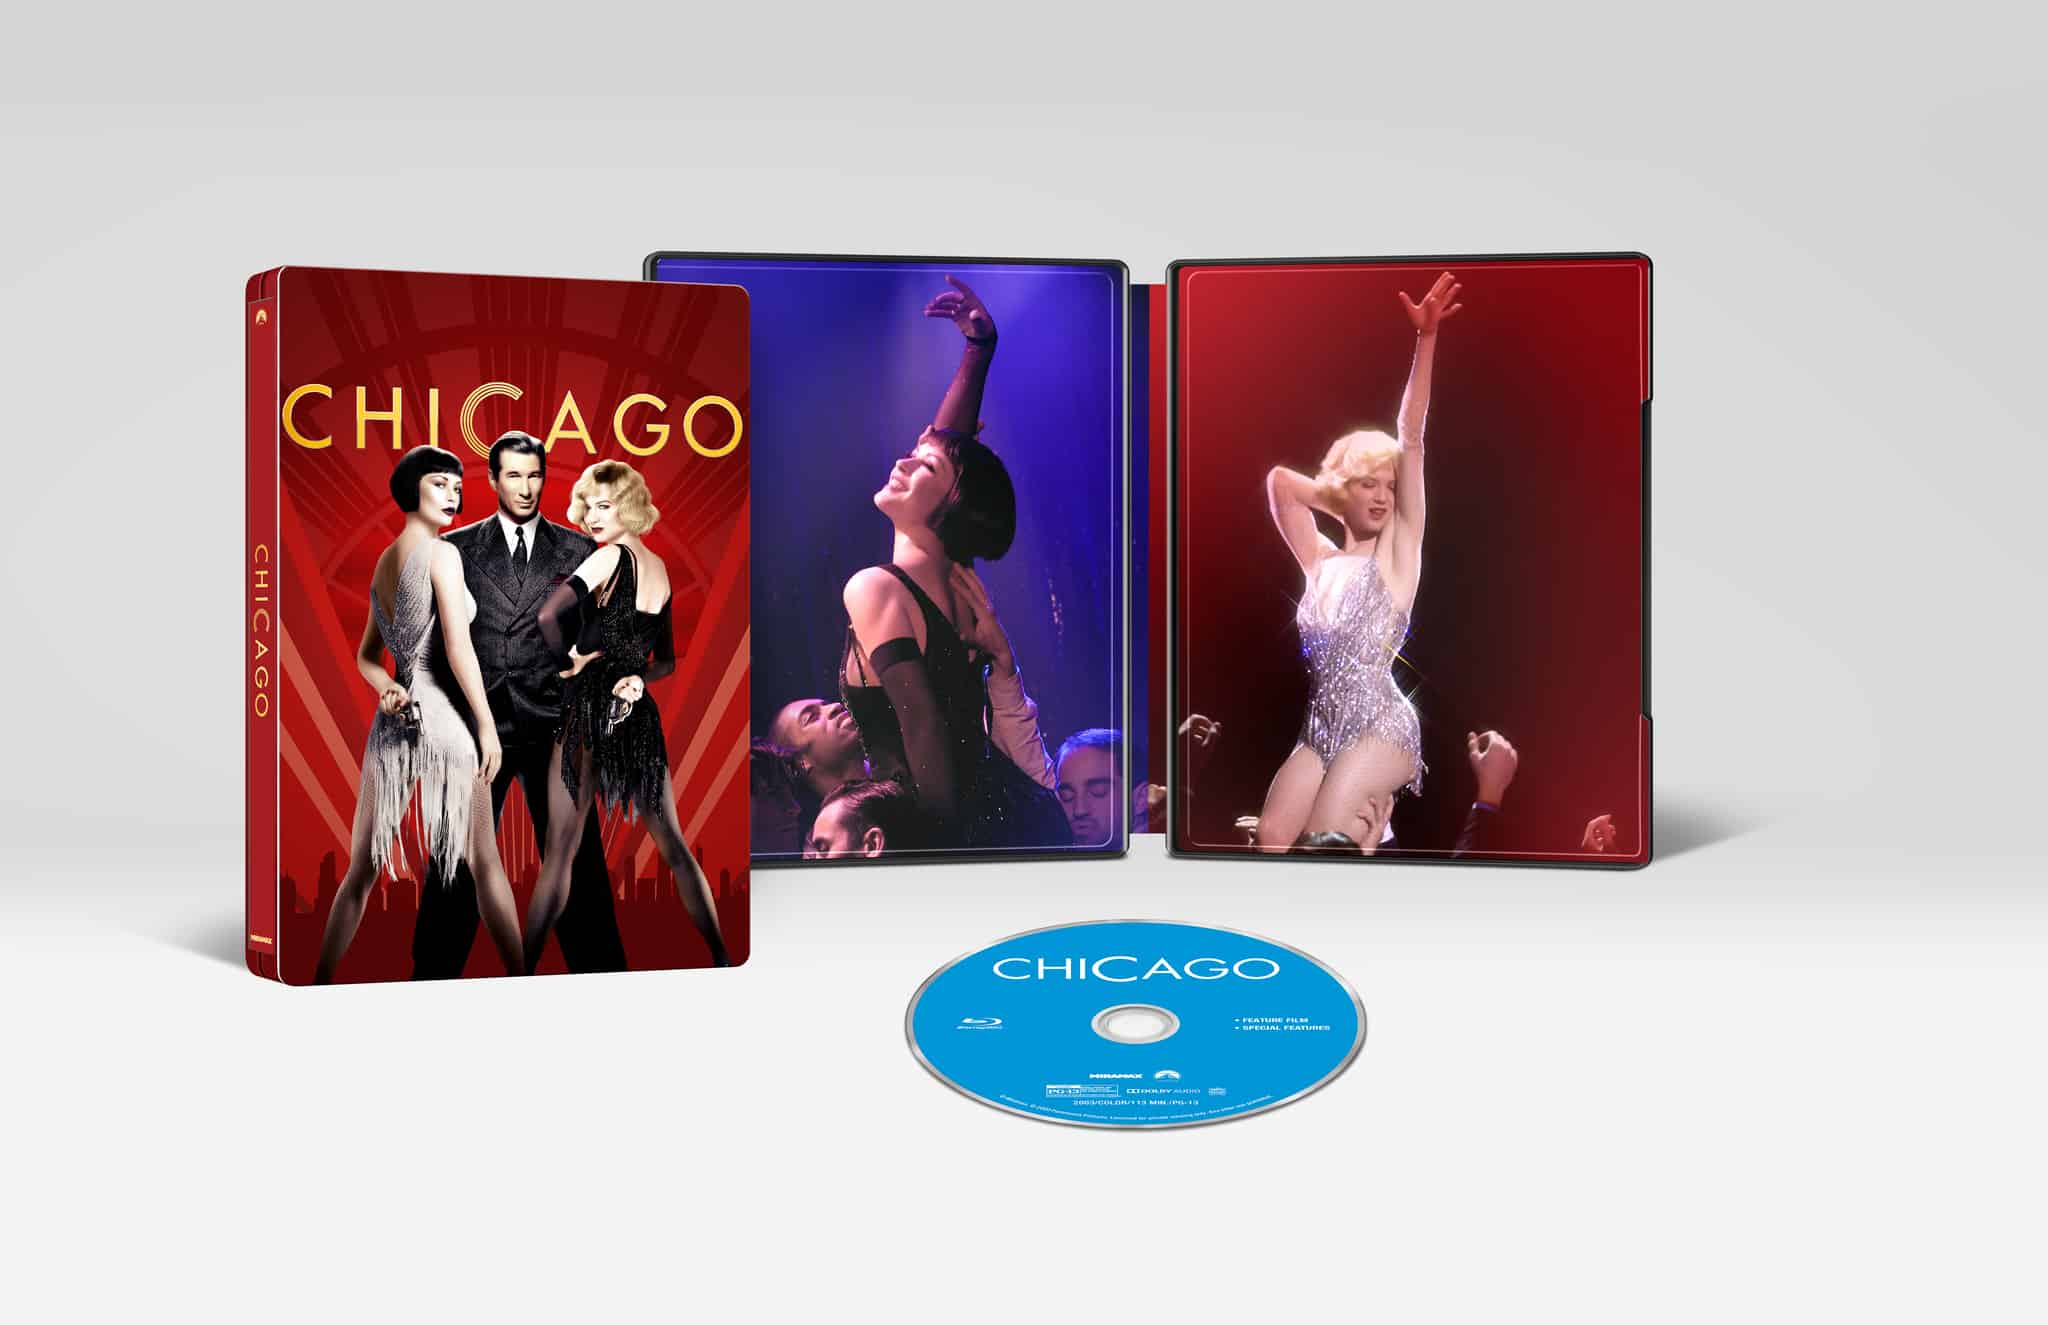 Chicago turns 20 with a Blu-ray steelbook 48